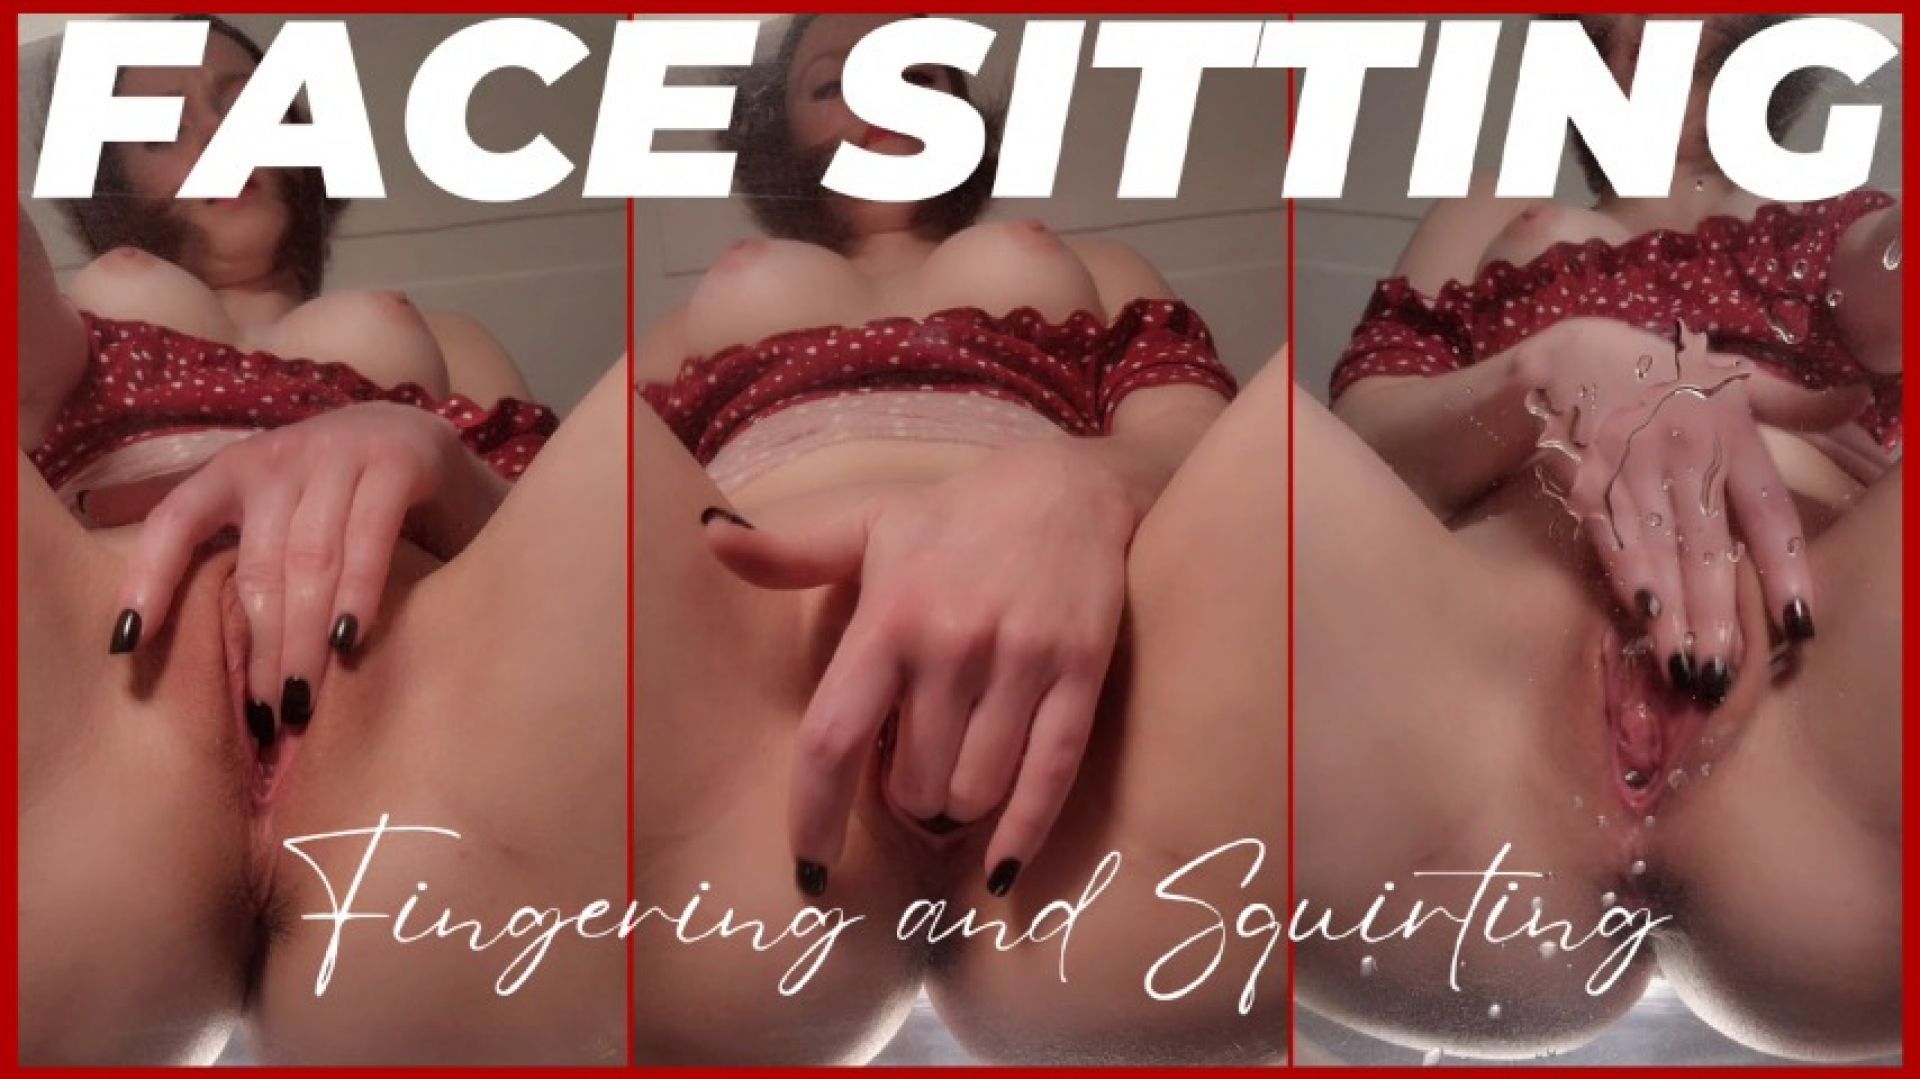 Face Sitting, Fingering, and Squirting